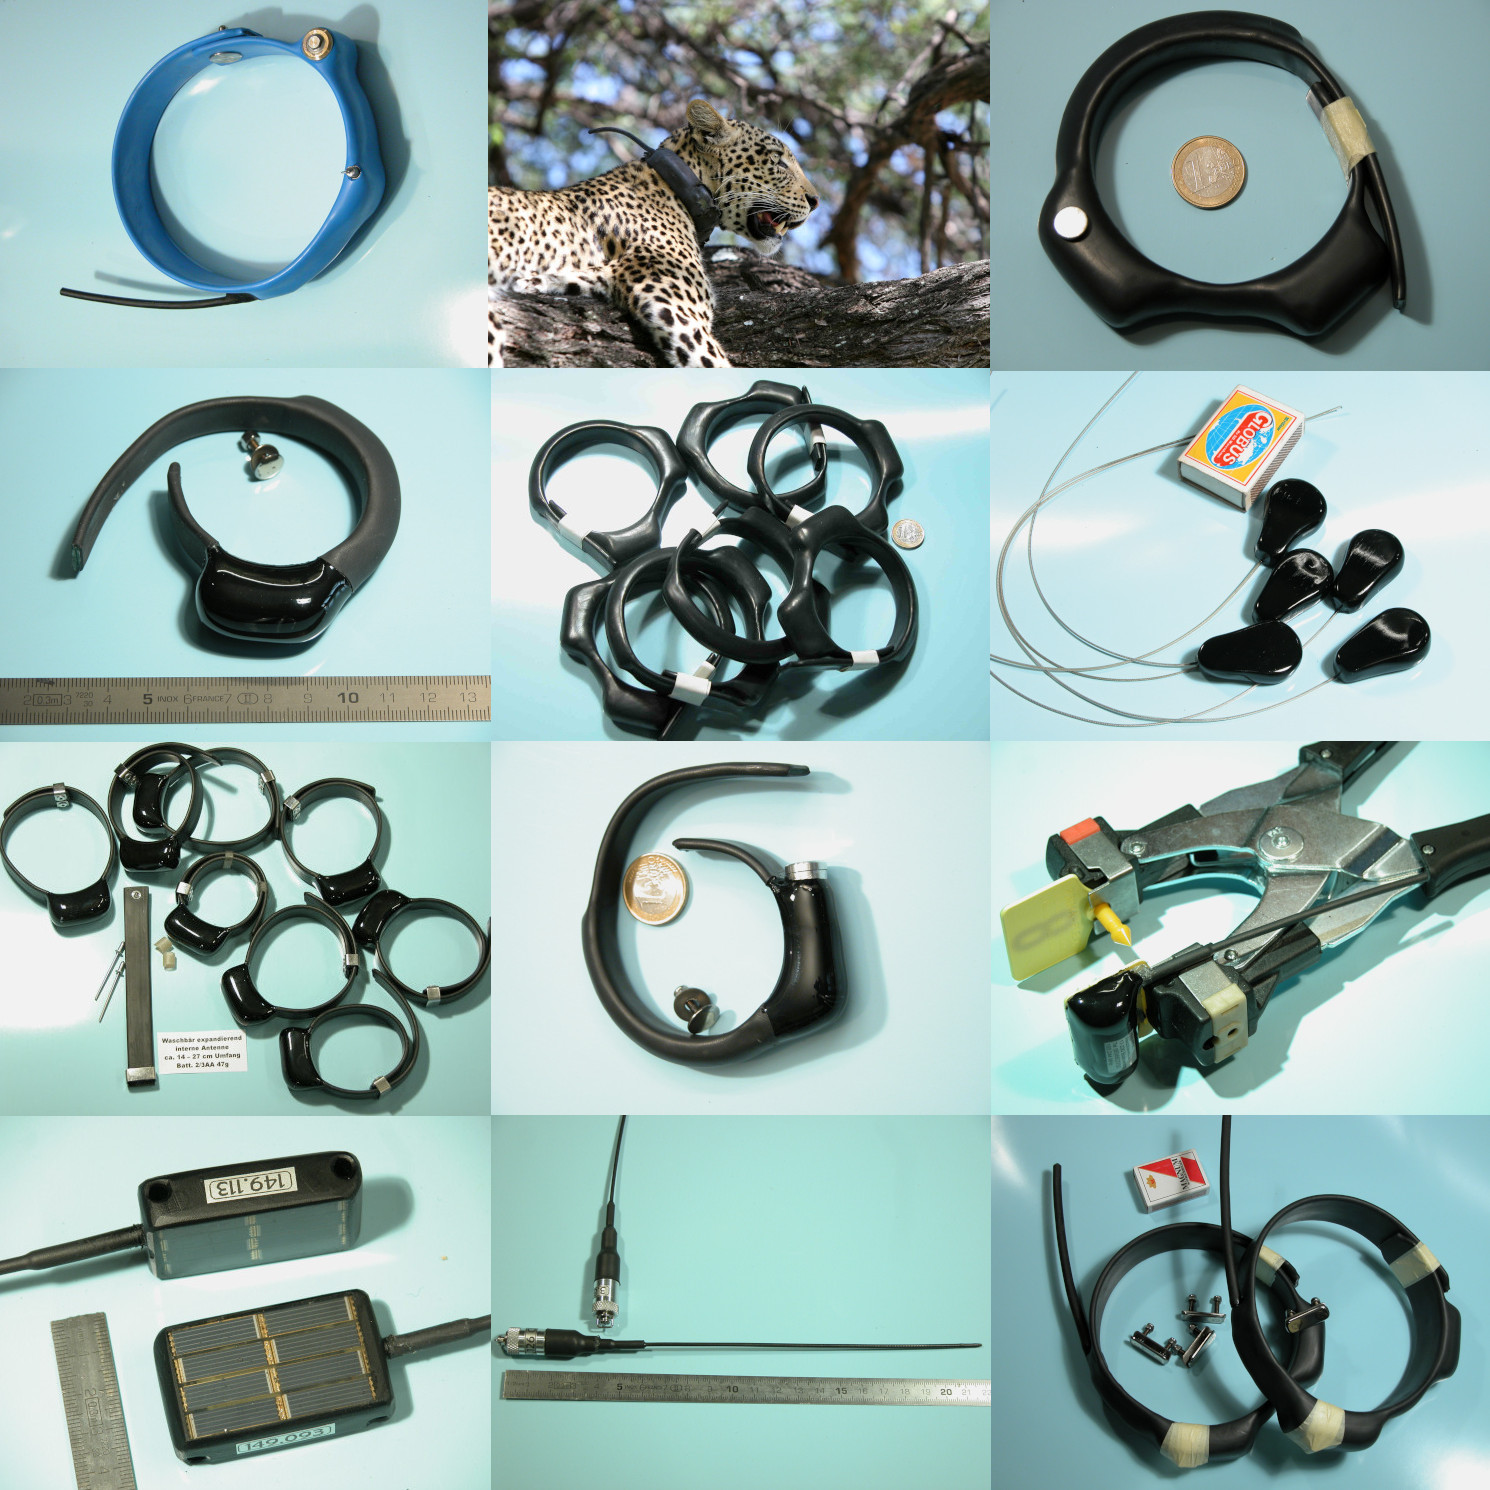 Some examples of wildlife transmitters